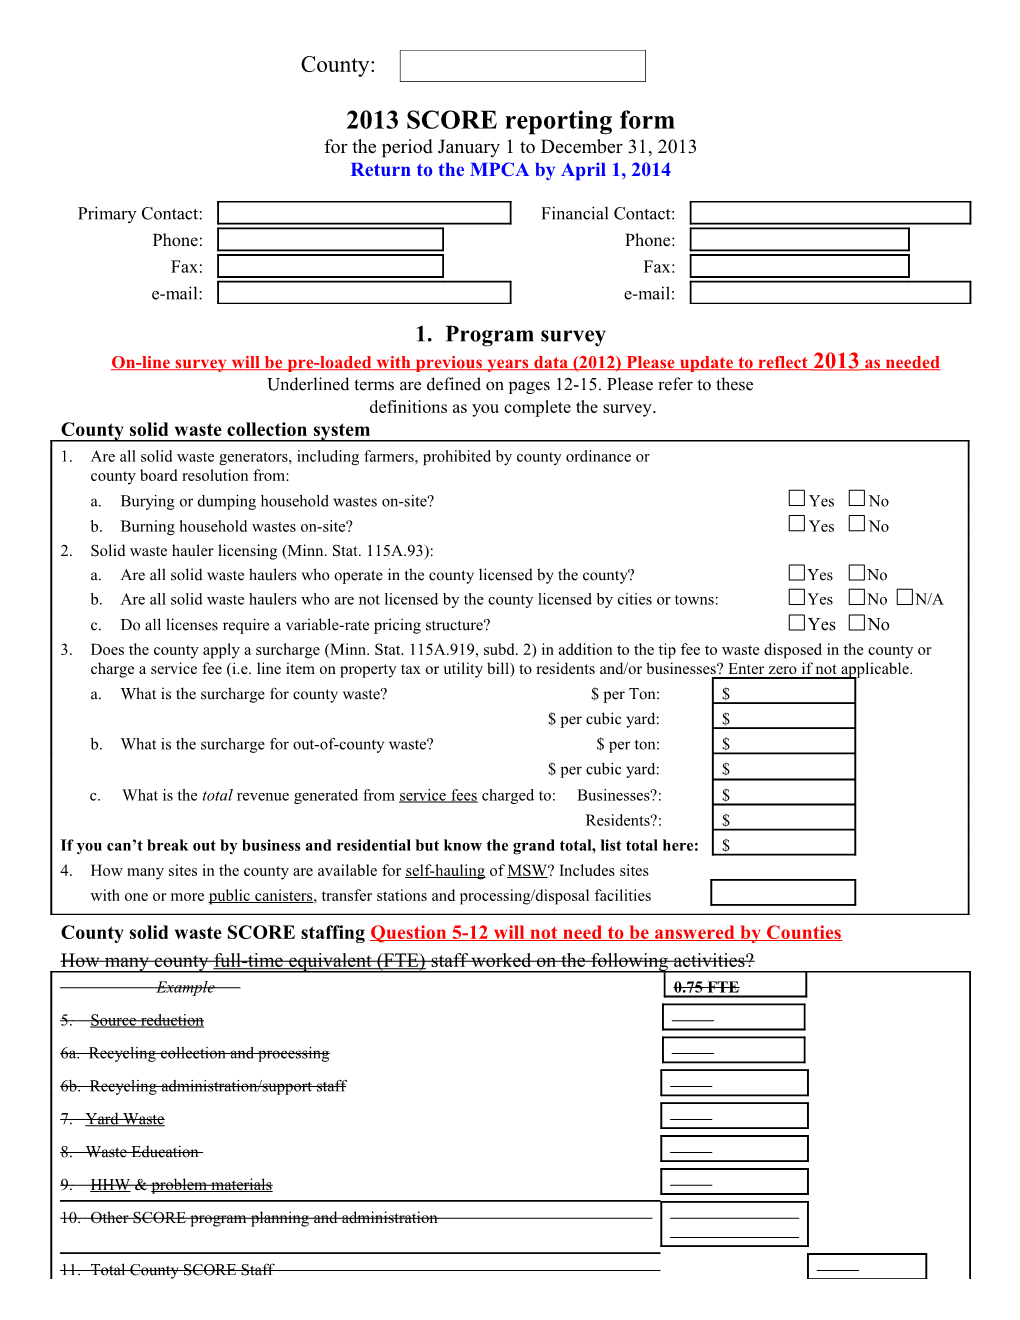 2011 SCORE Reporting Form